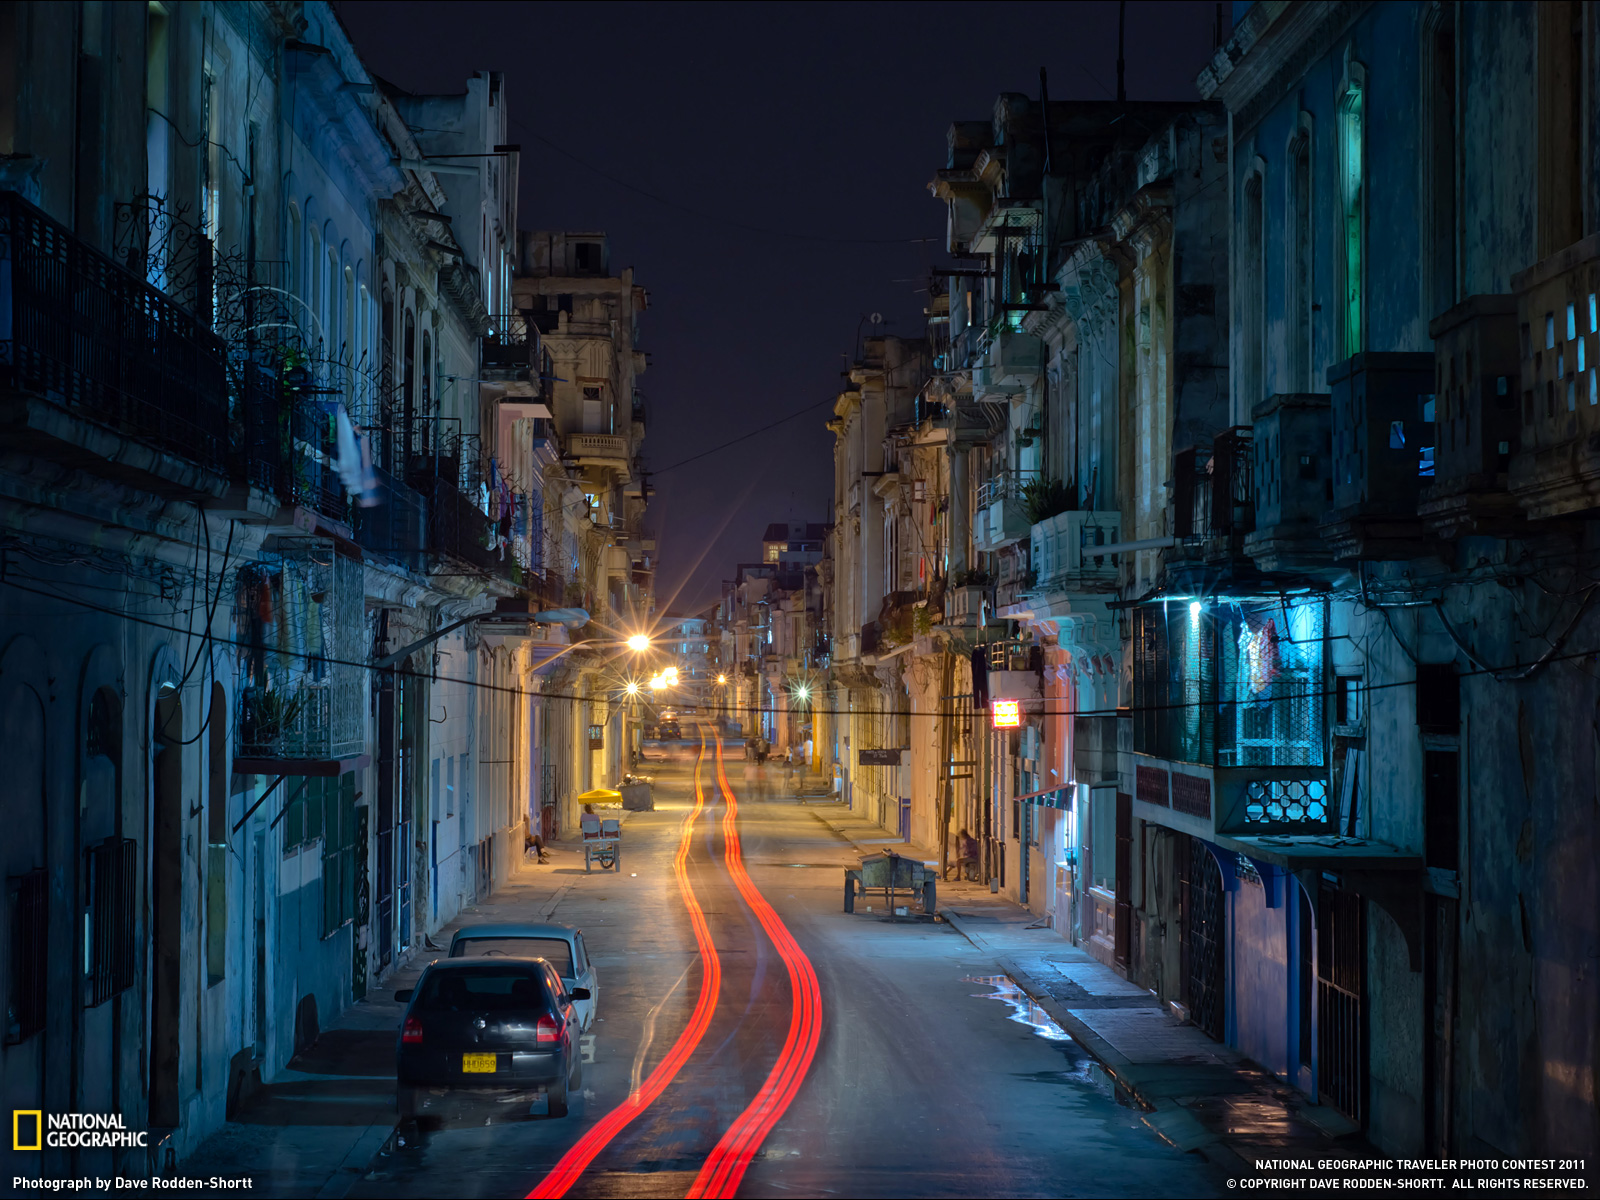 Havana Picture Cuba Wallpaper National Geographic Photo Of The